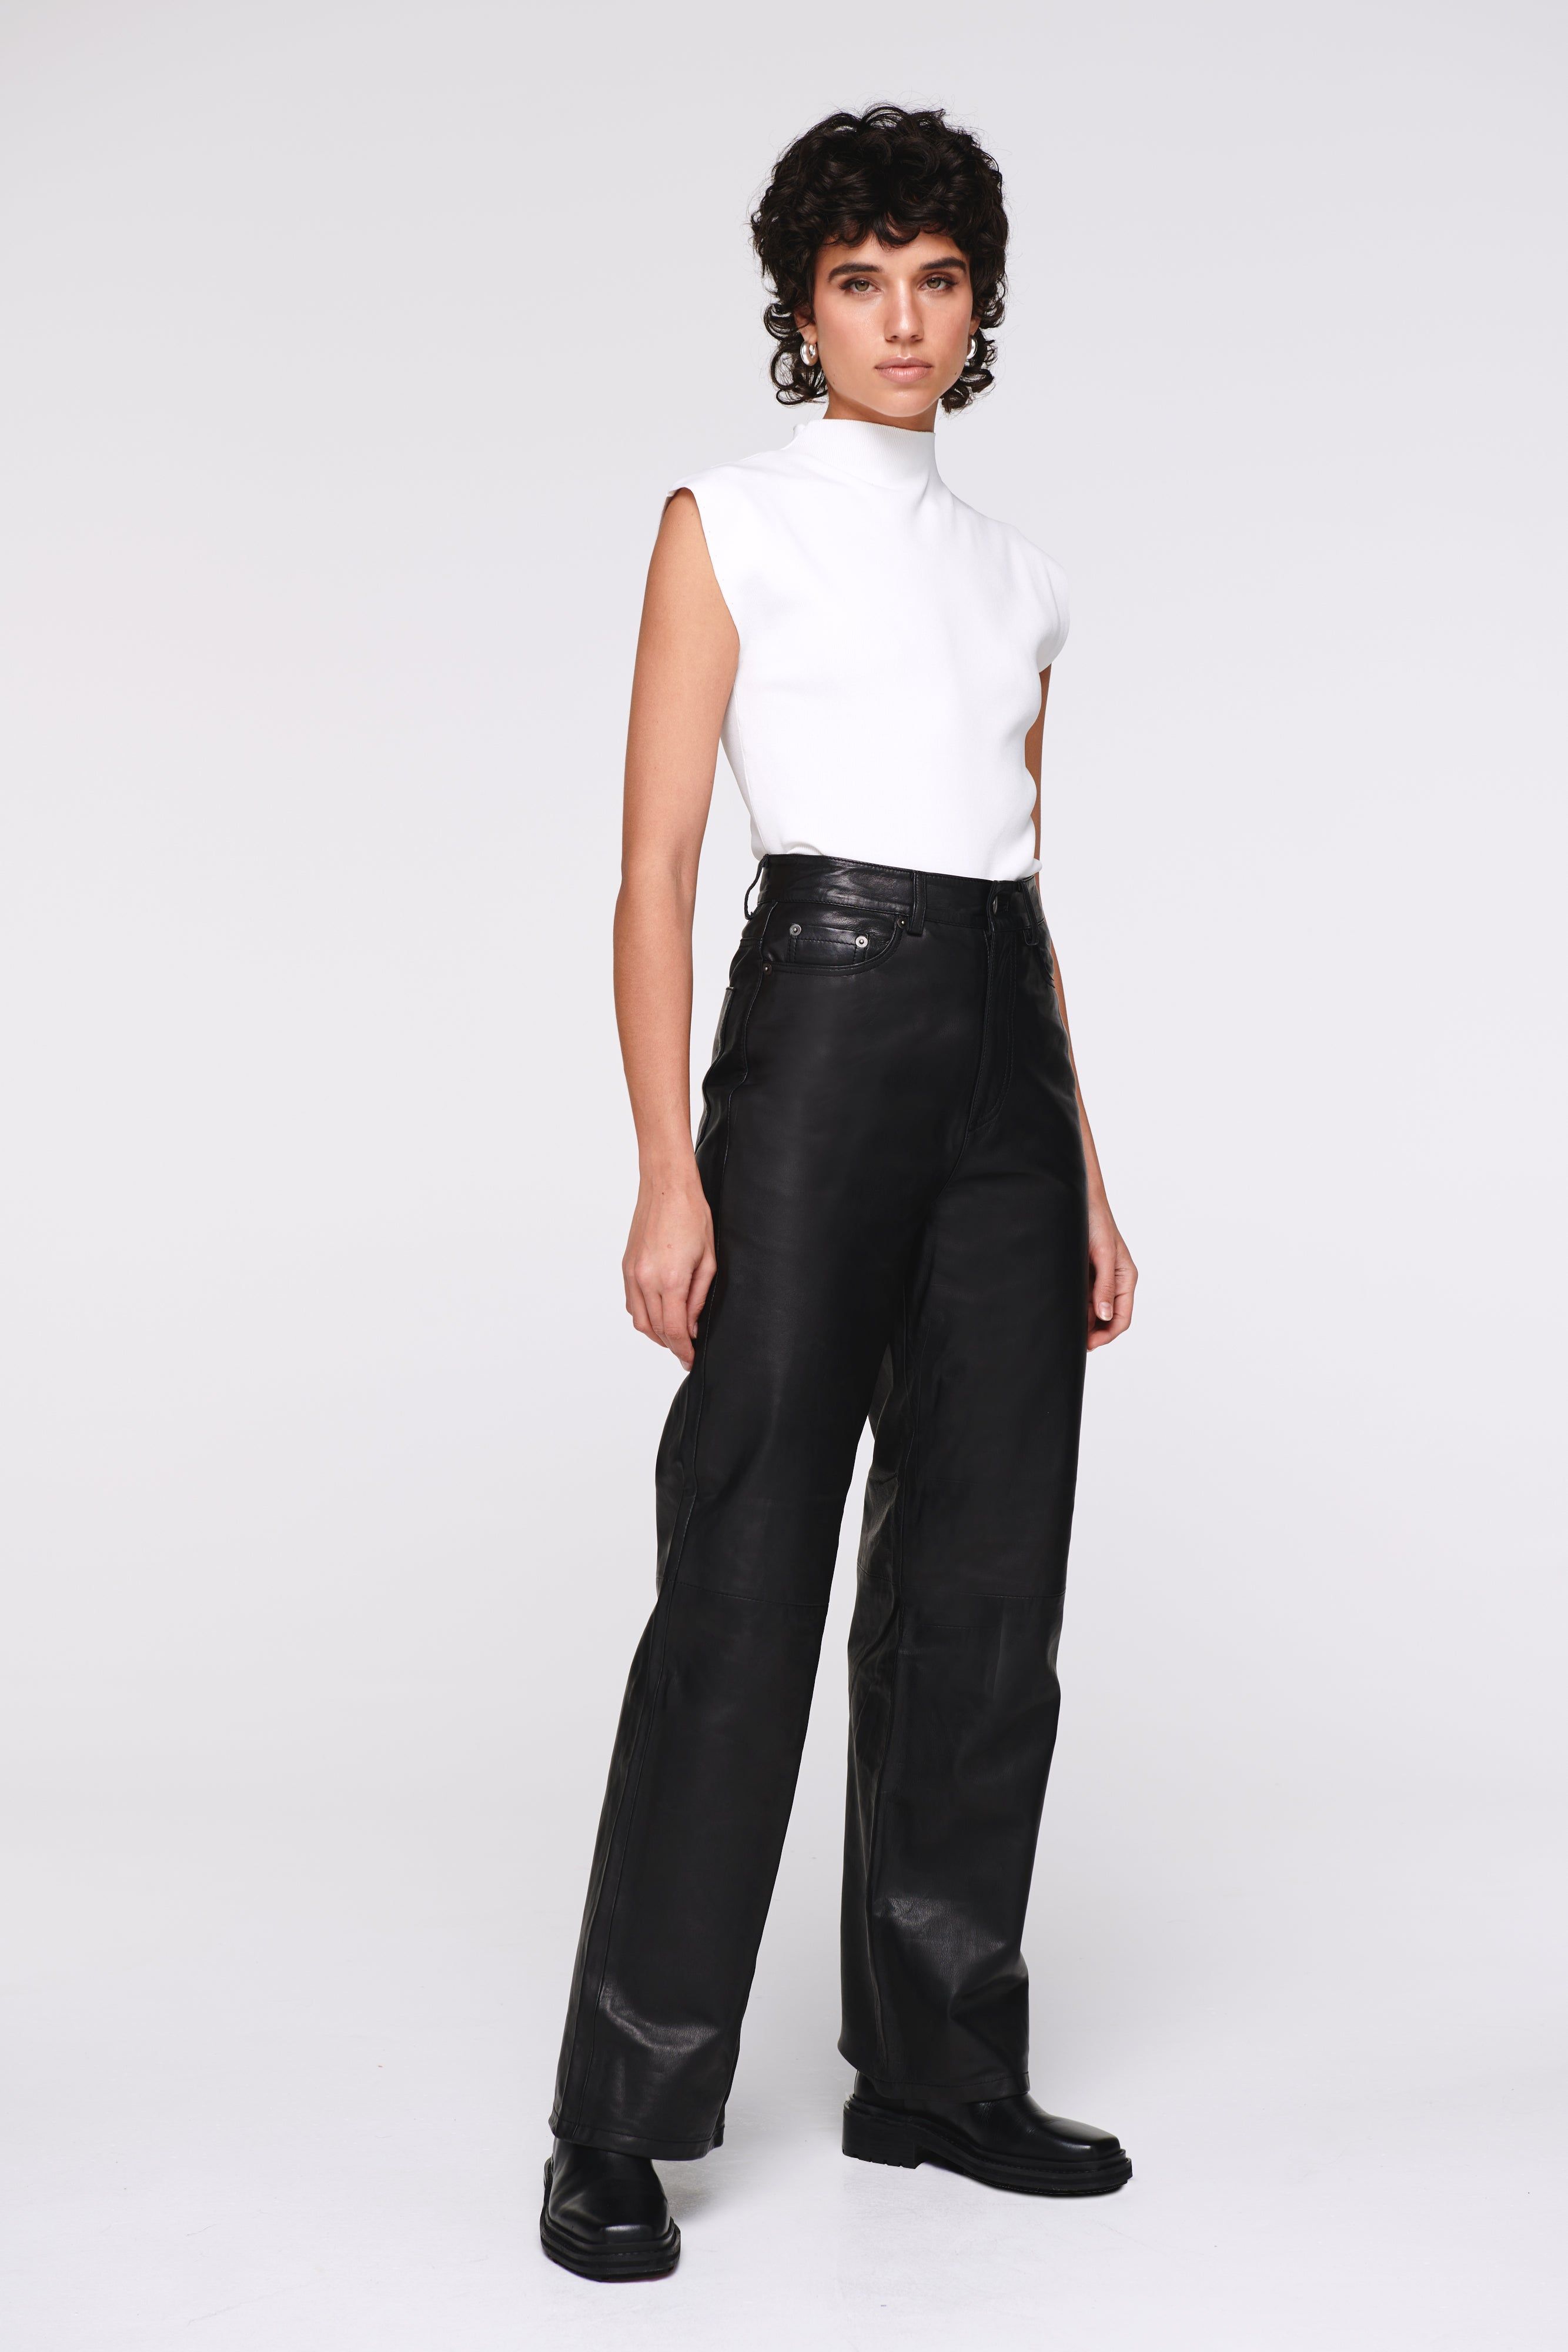 Buy Lipsy Black Leather Trousers from Next India